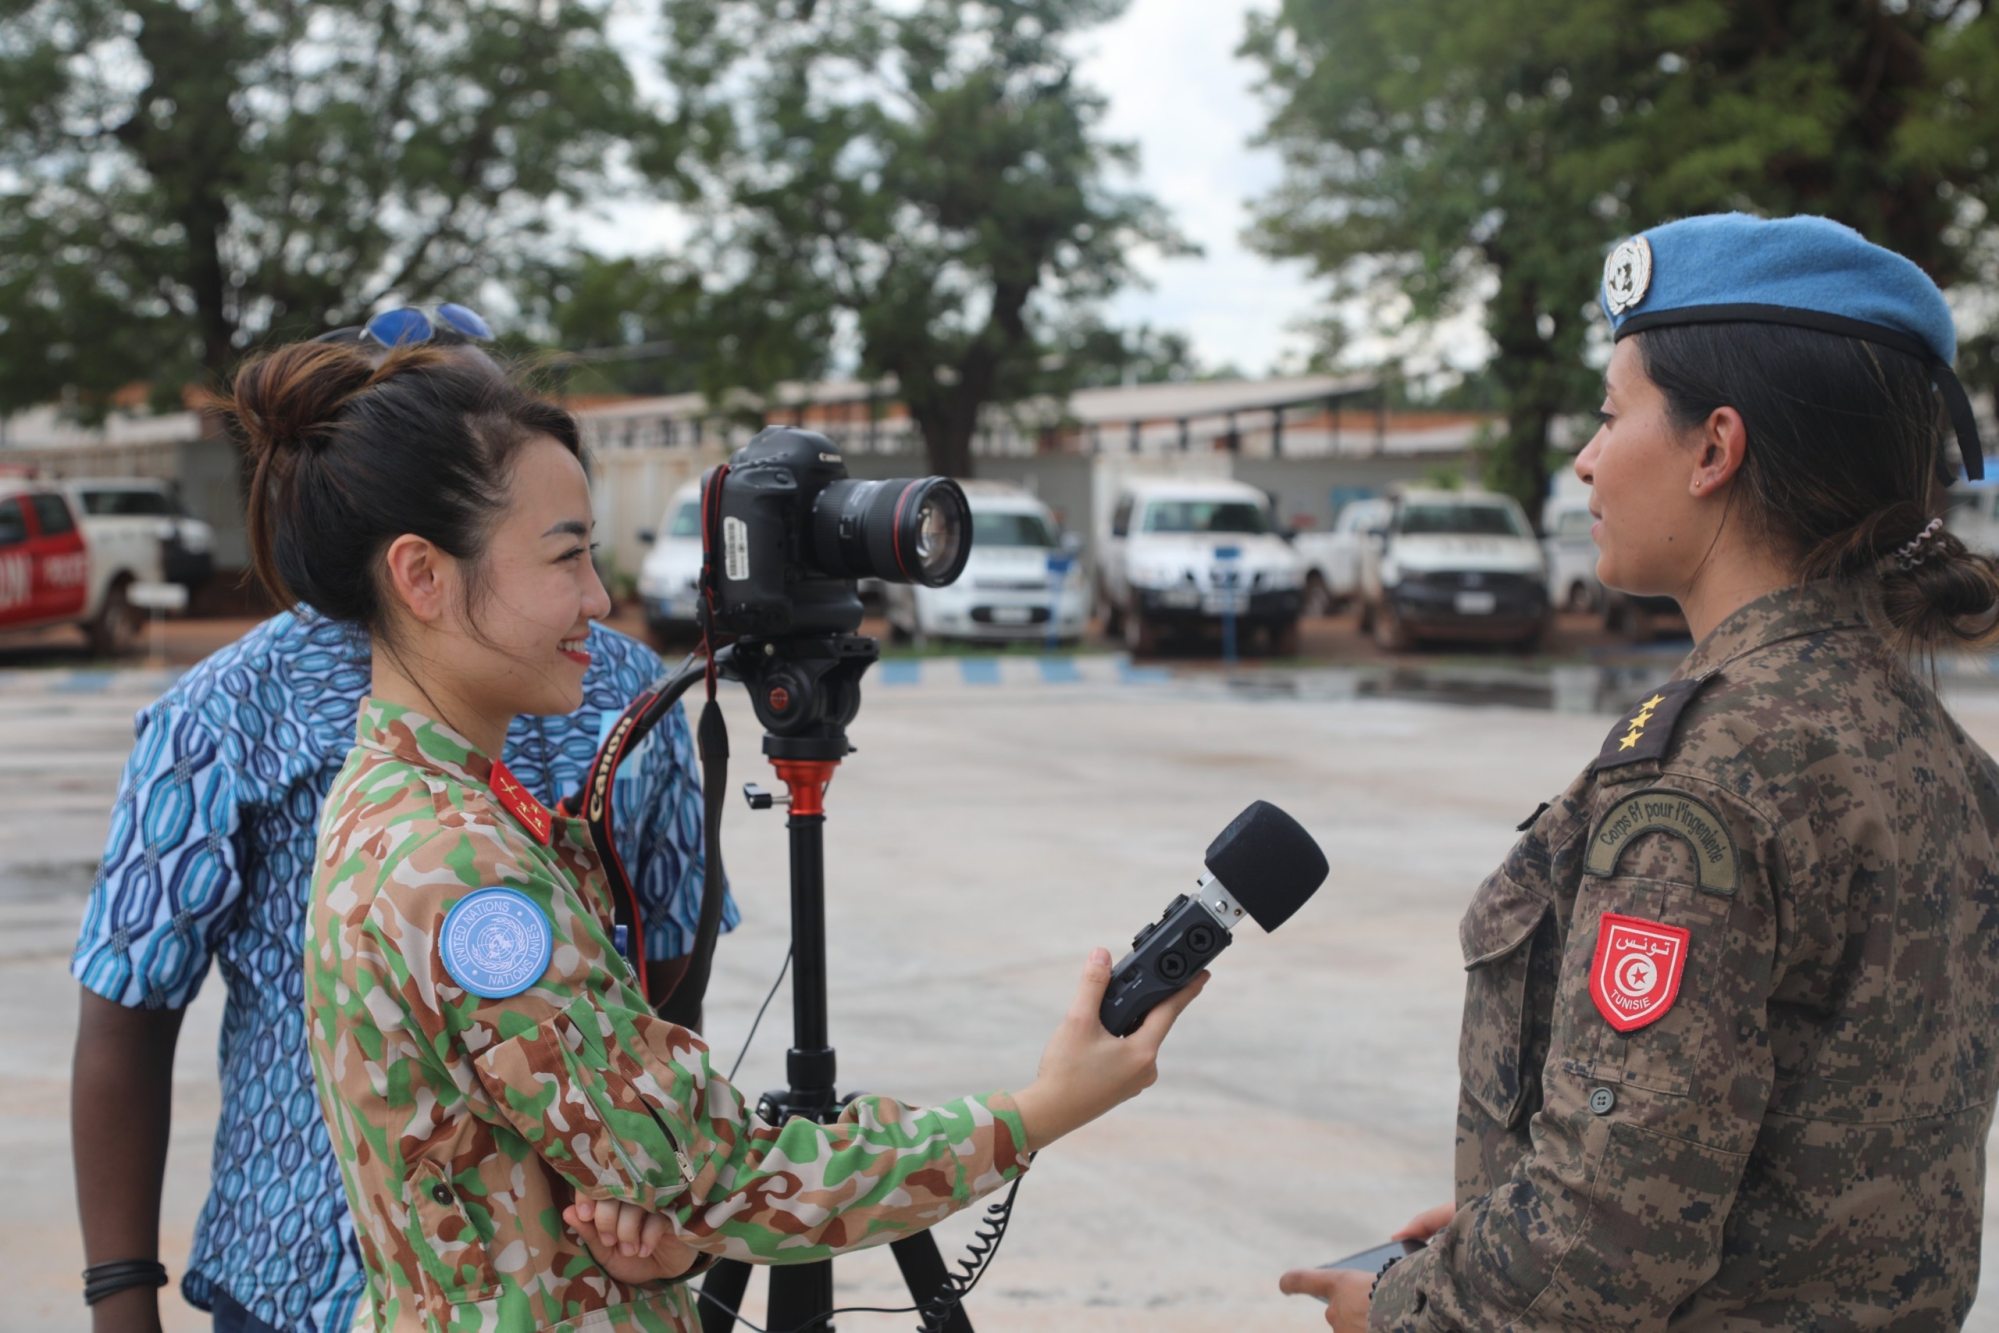 Celebrating women peacekeepers from across Europe and Central Asia